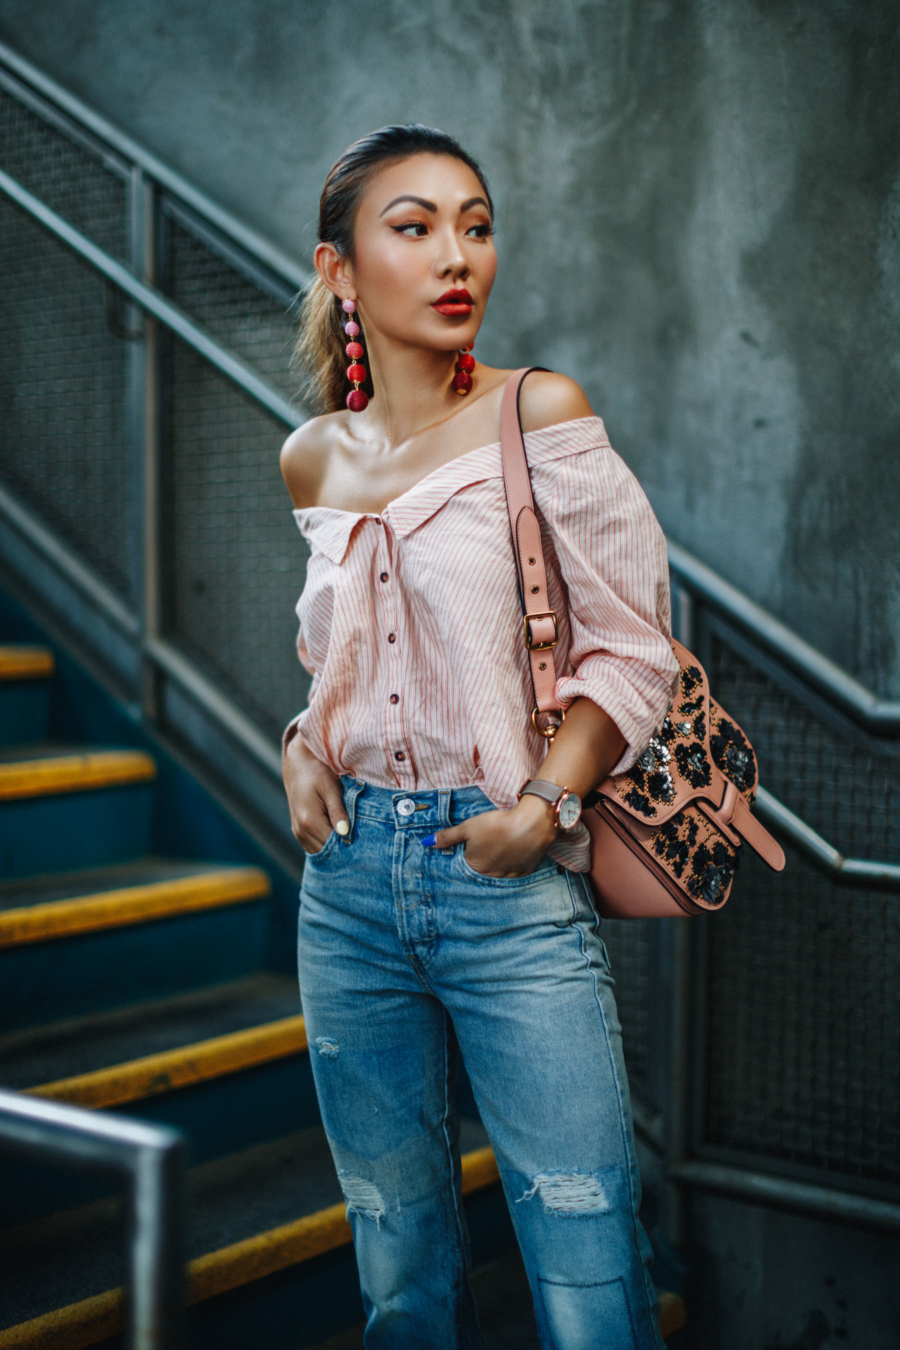 Off The Shoulder Top and Bonbon Earrings - Embellished Pieces That Will Make Your Outfits Shine // NotJessFashion.com